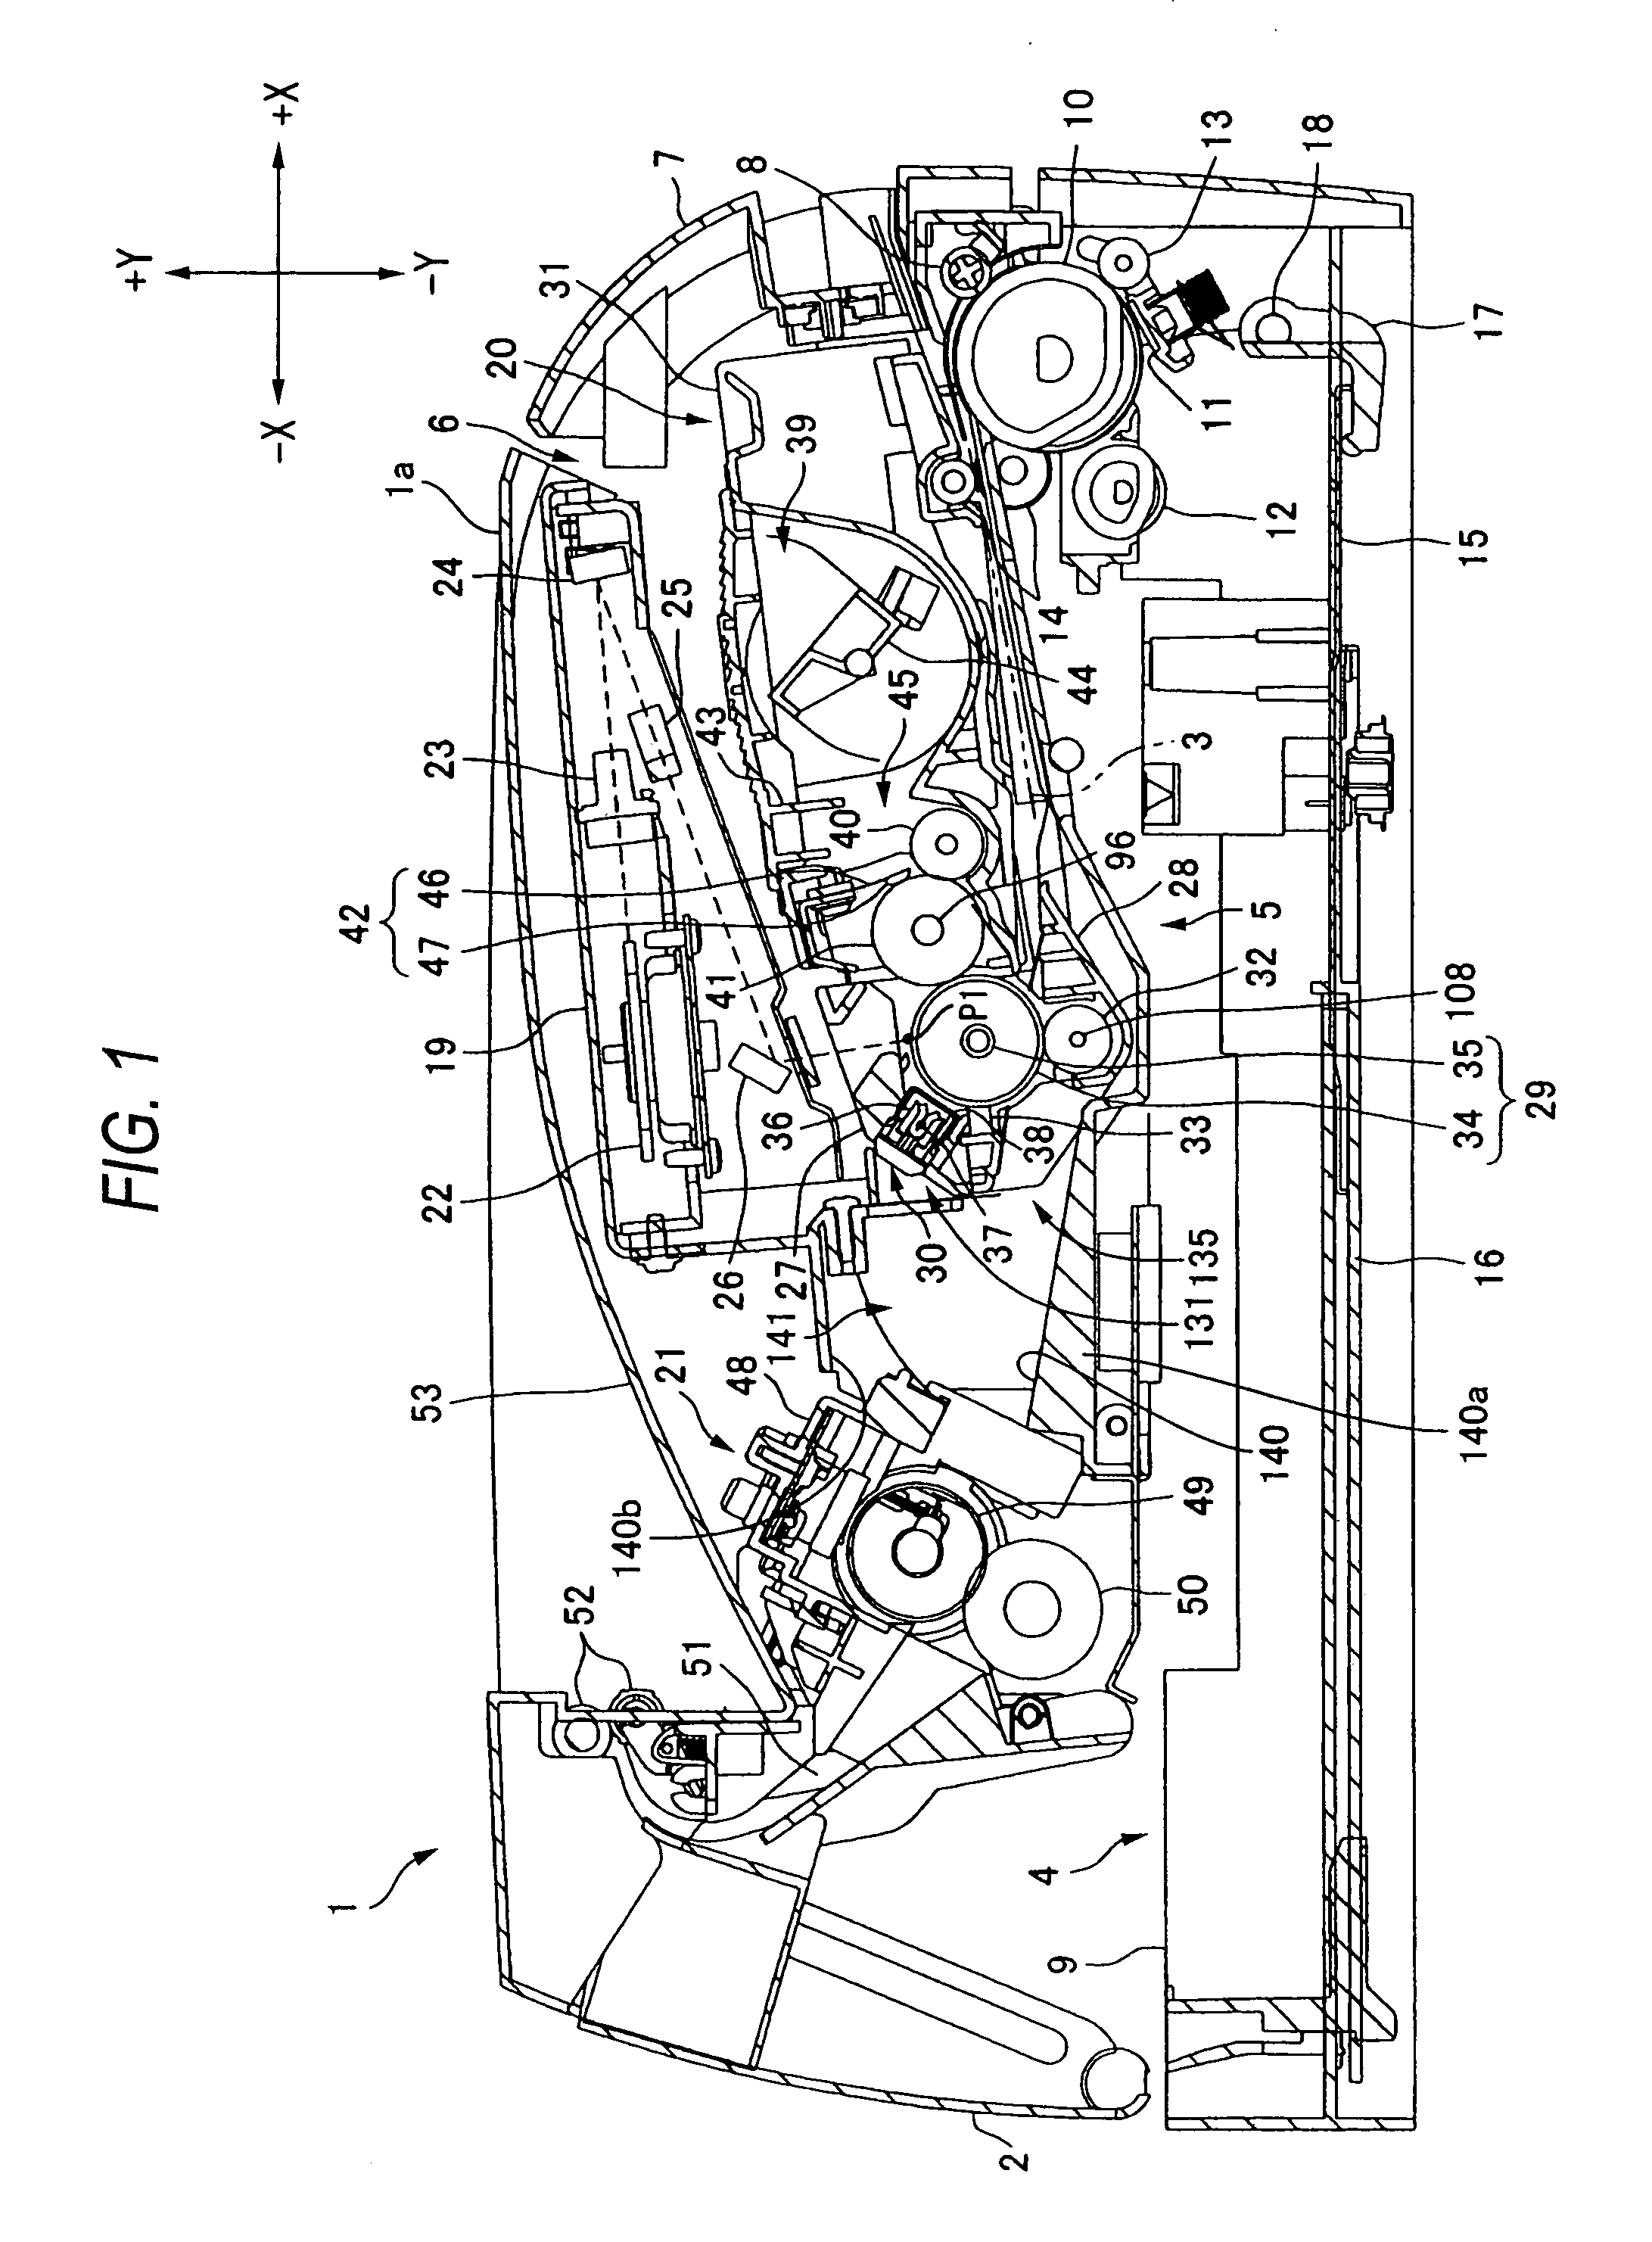 Charger, image forming apparatus and process cartridge